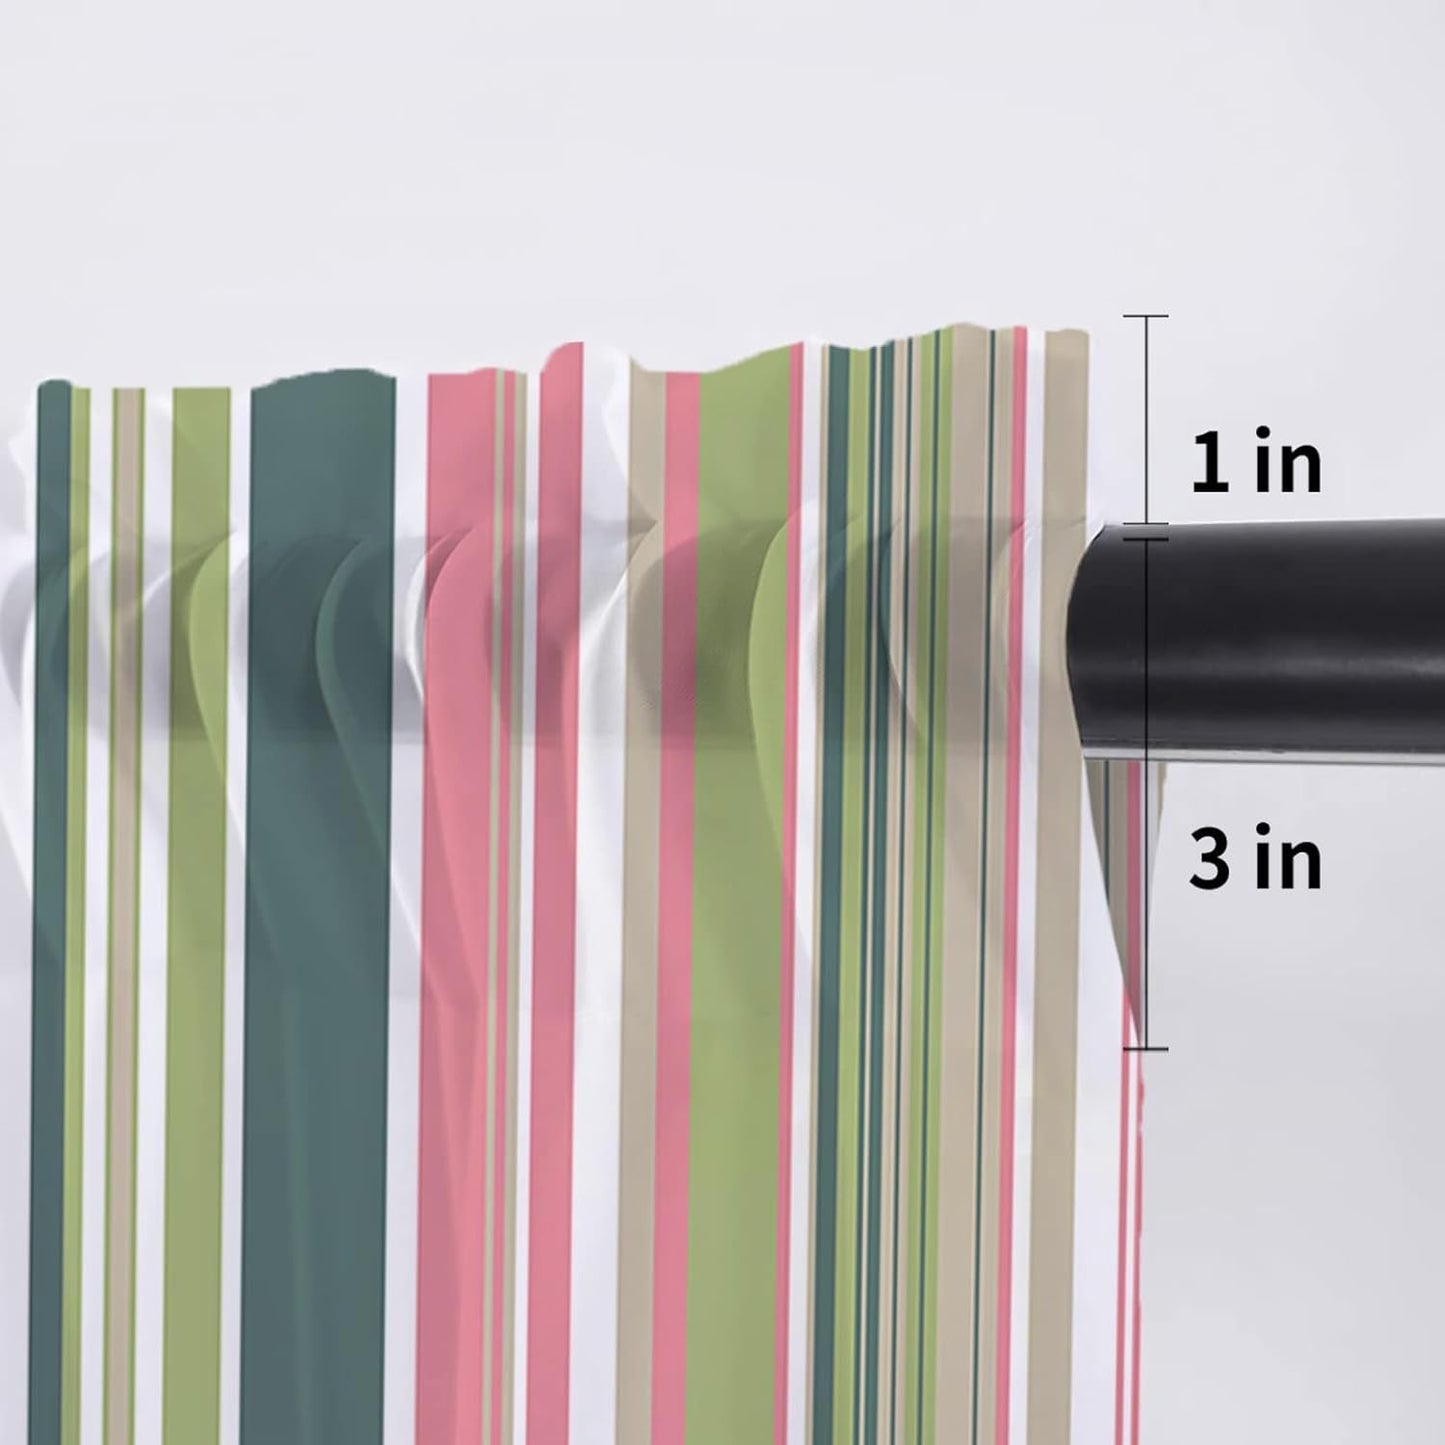 Chiffon Window Valance Kitchen Curtains Pink White Sage Green Vertical Stripe,Rod Pocket Tier Curtain Light Filter Panel,Color Straight Lines Windows Valances Drapes for Bedroom,Bathroom 54X18In